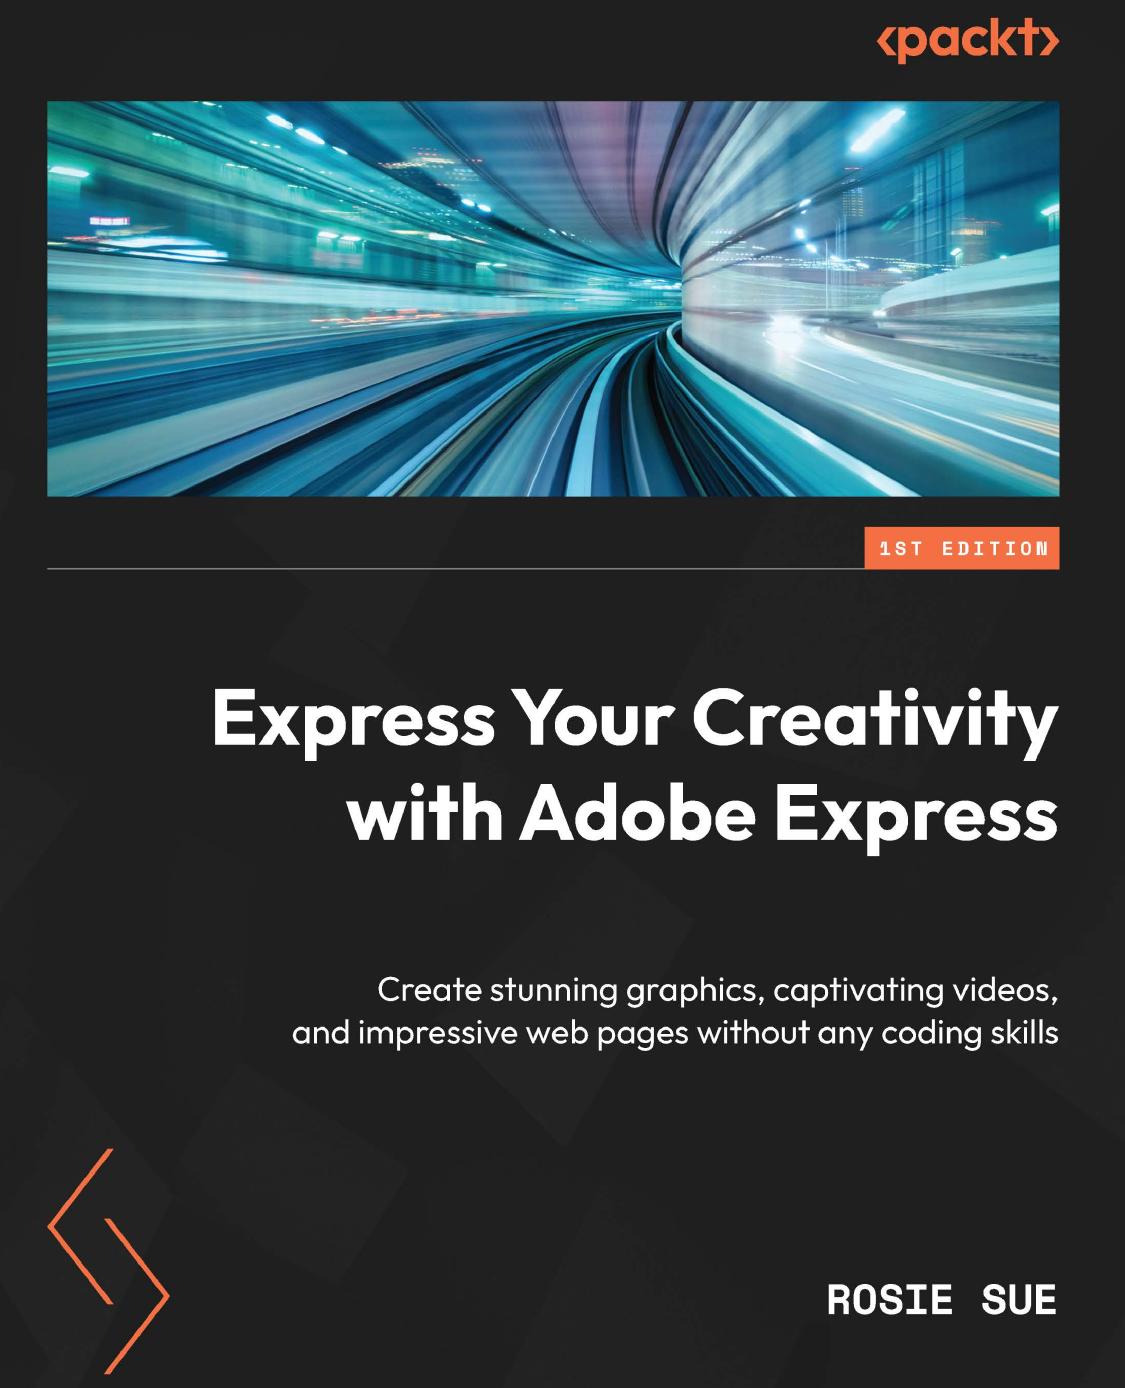 Express Your Creativity with Adobe Express: Create stunning graphics, captivating videos, and impressive web pages without any coding skills by Rosie Sue